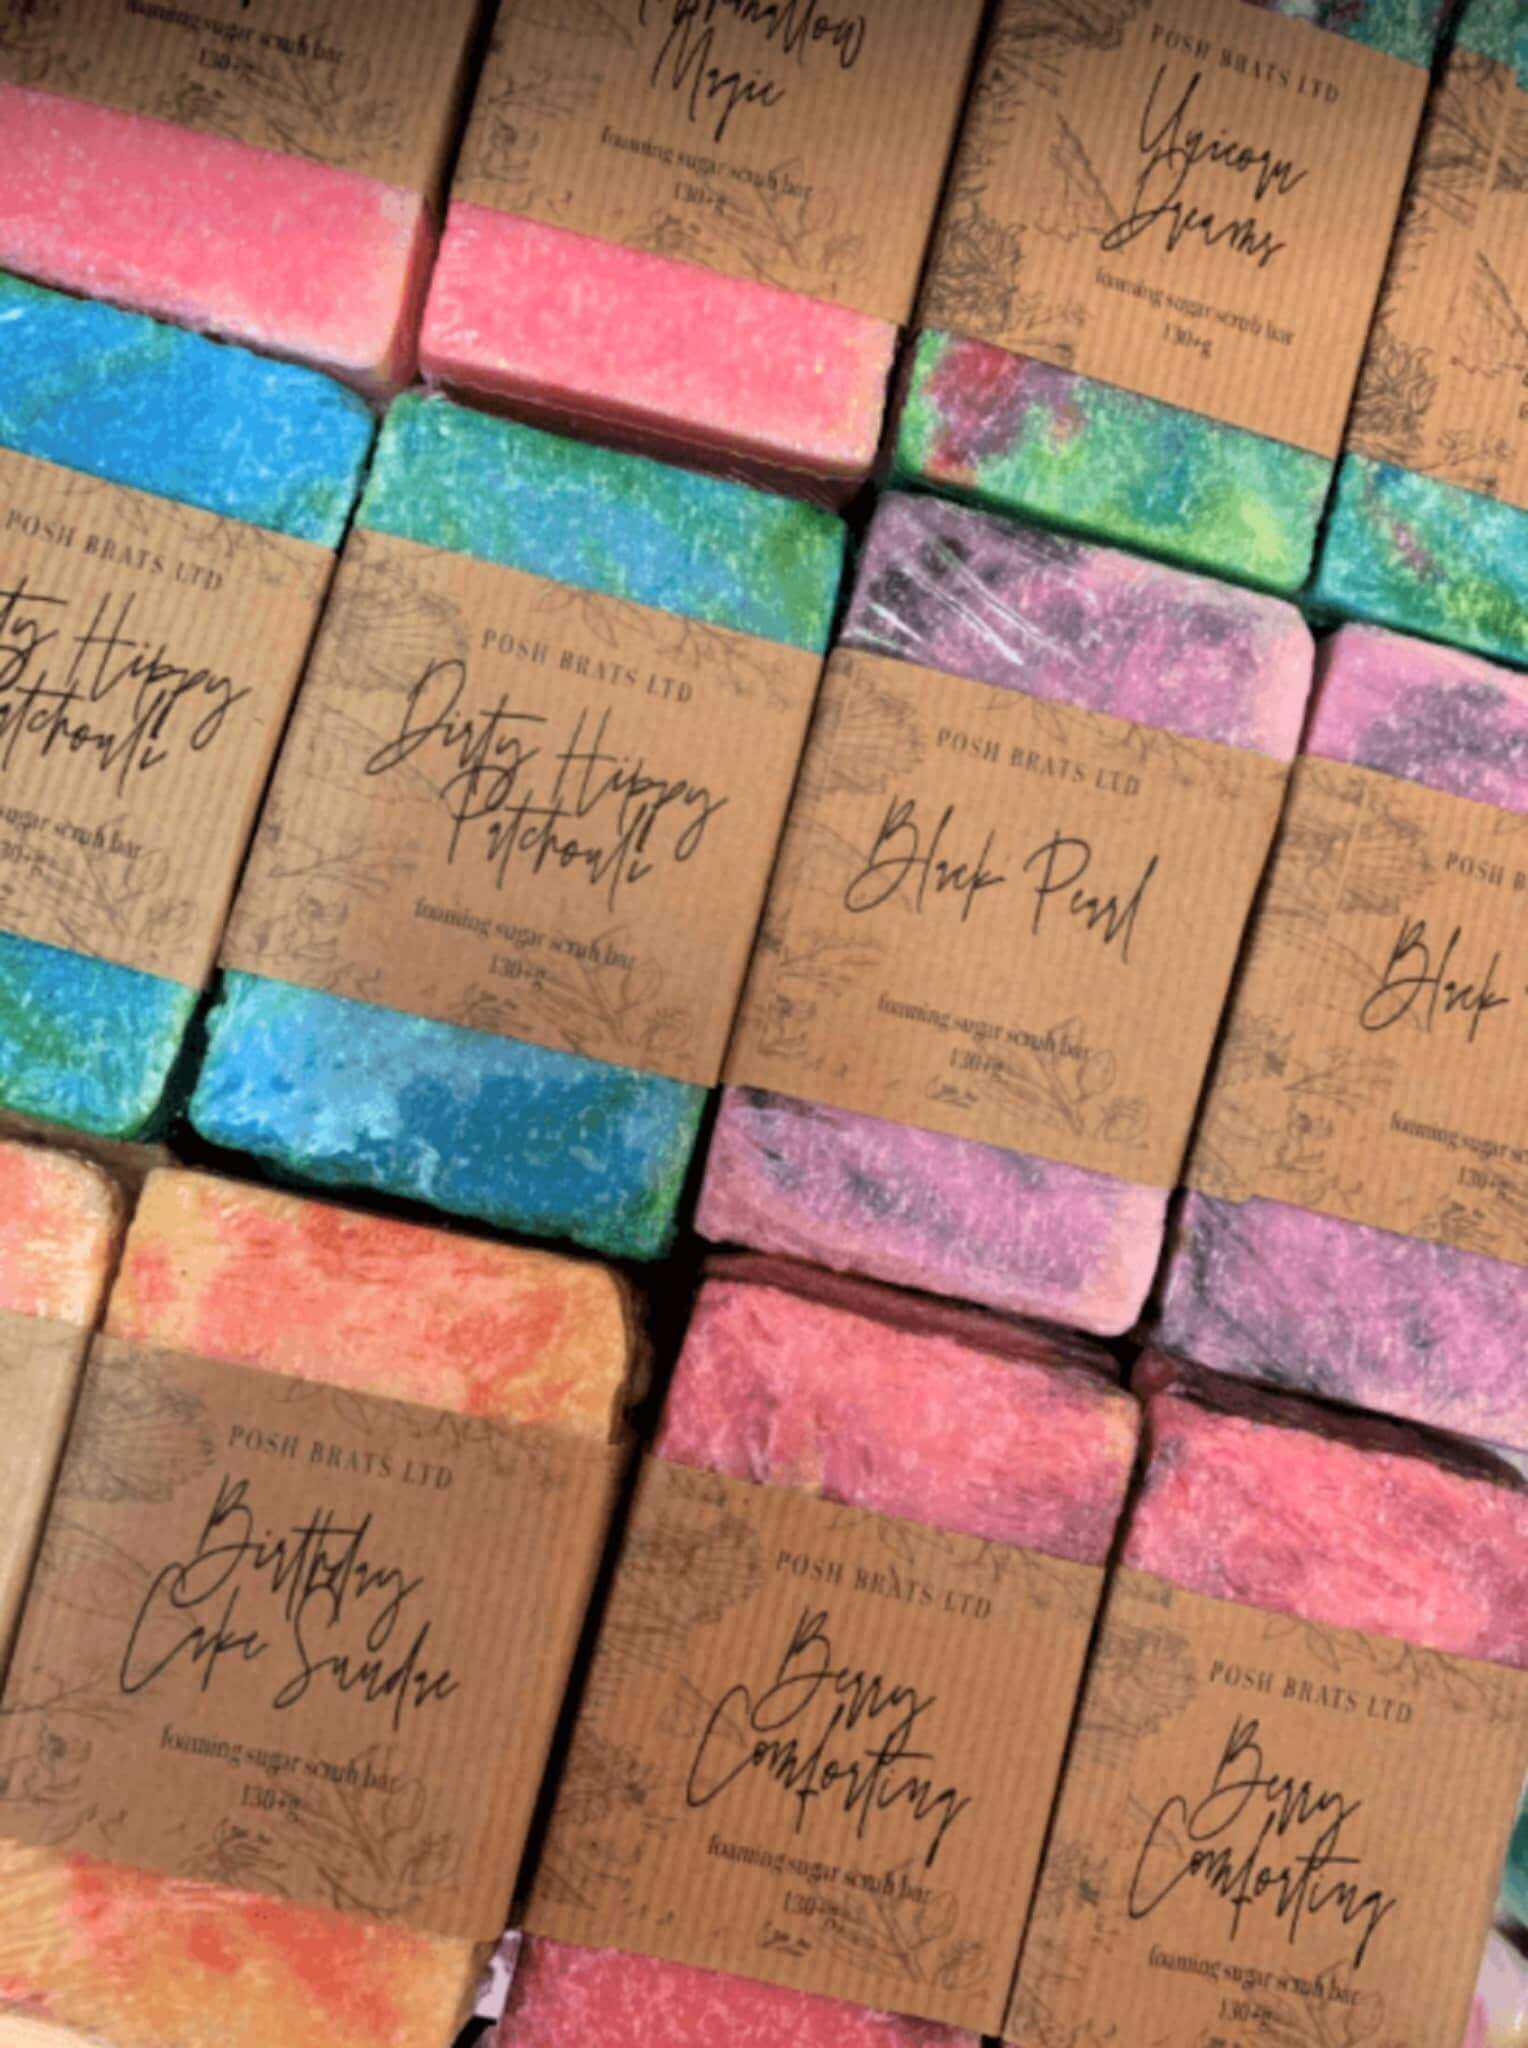 Making showers dreamy with Unicorn Dreams Sugar Scrub Shower Bar. Your skin will thank you for this mystical indulgence.